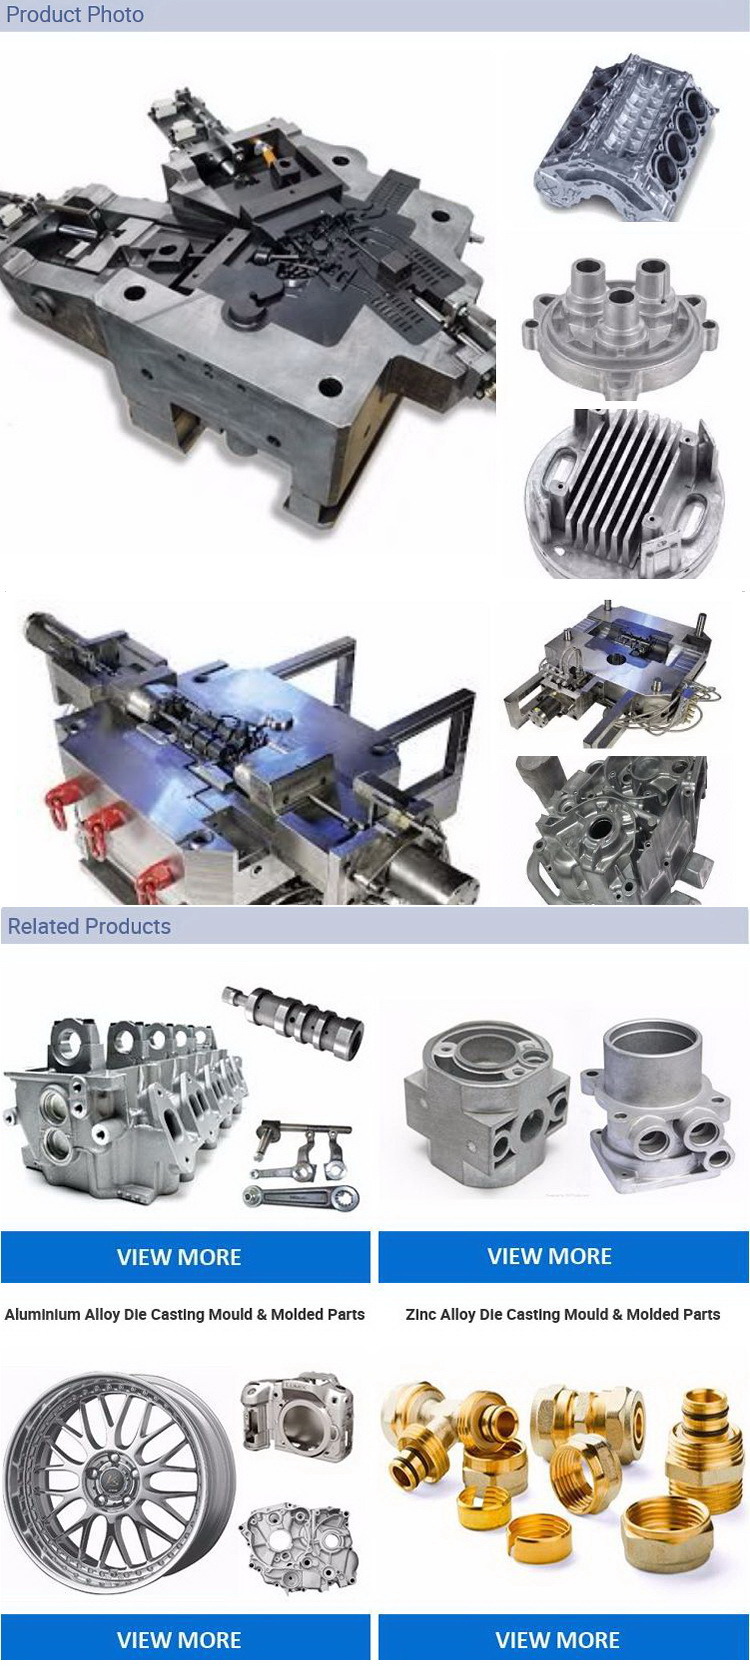 ADC12 Aluminum Die Cast Products Aluminum Alloy Die-Casting with Powder Coating